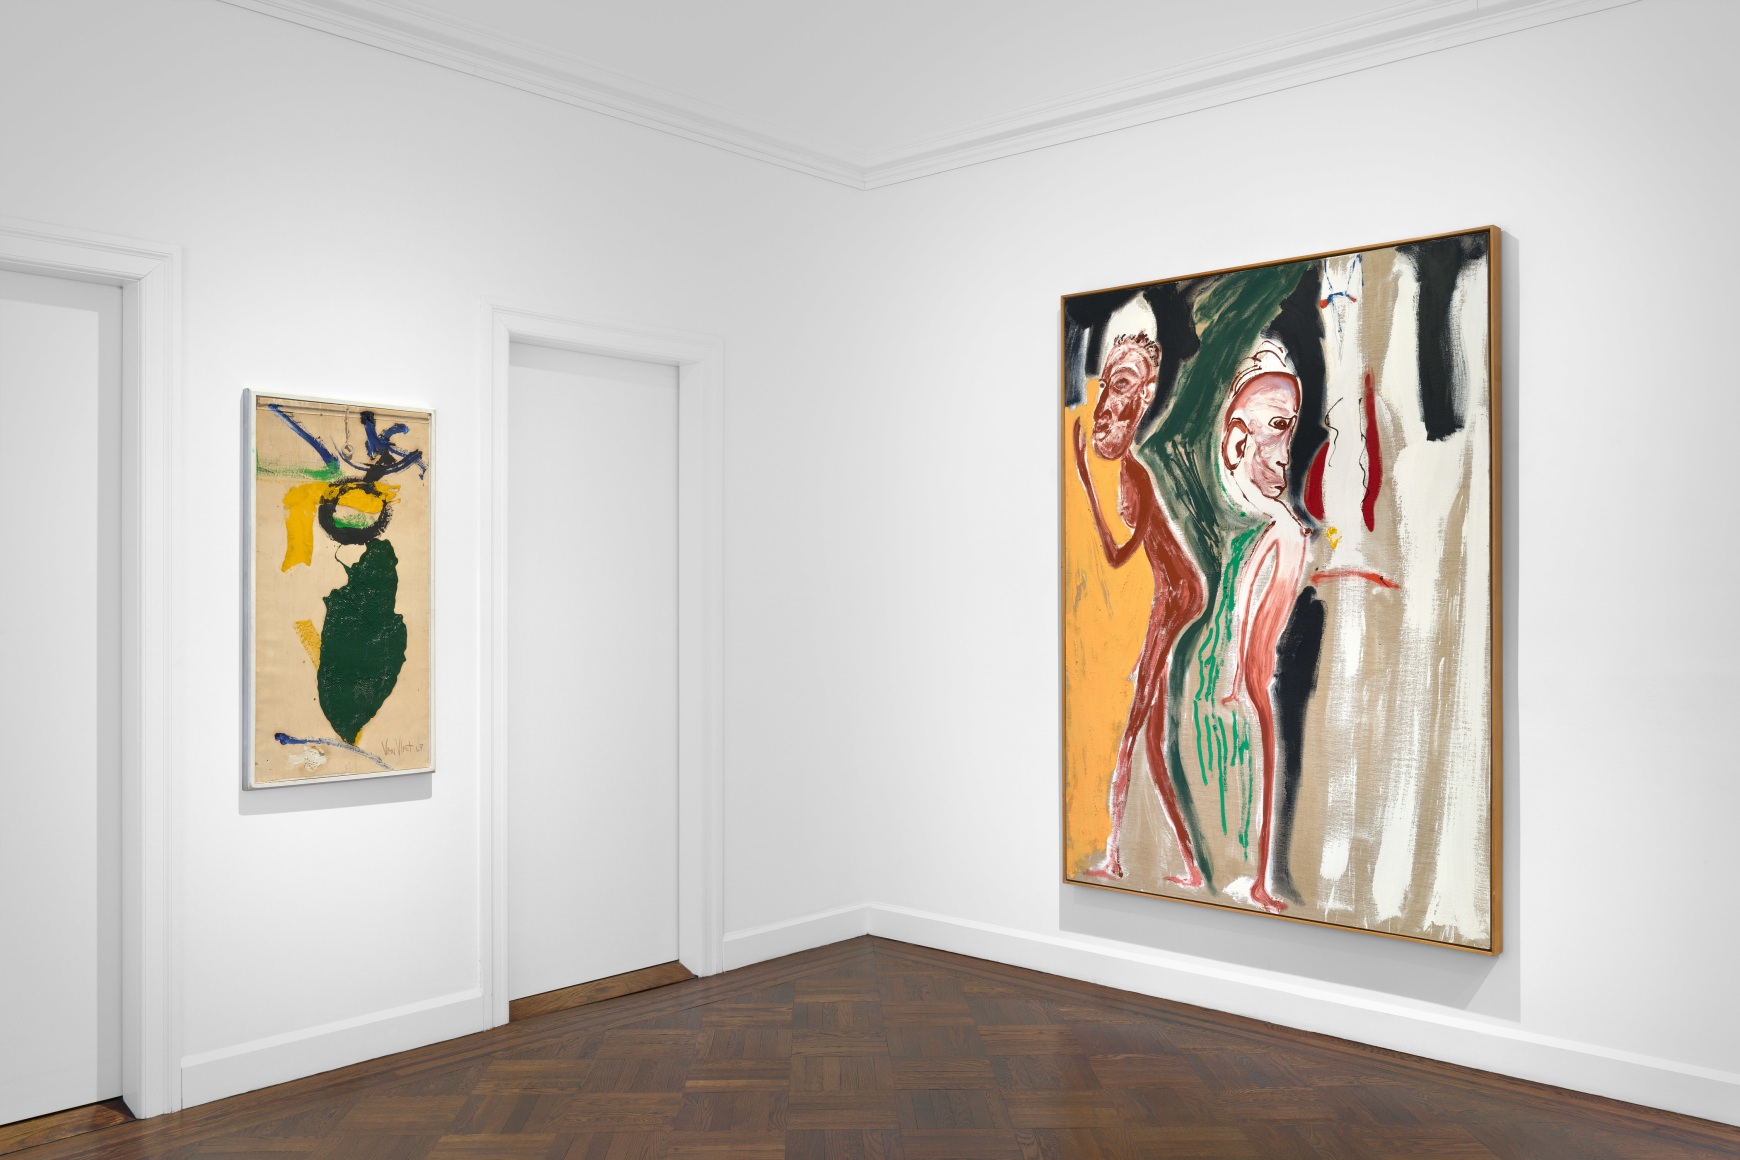 Don Van Vliet, Parapliers the Willow Dipped, Paintings 1967-1997, New York, 2020, Installation Image 13